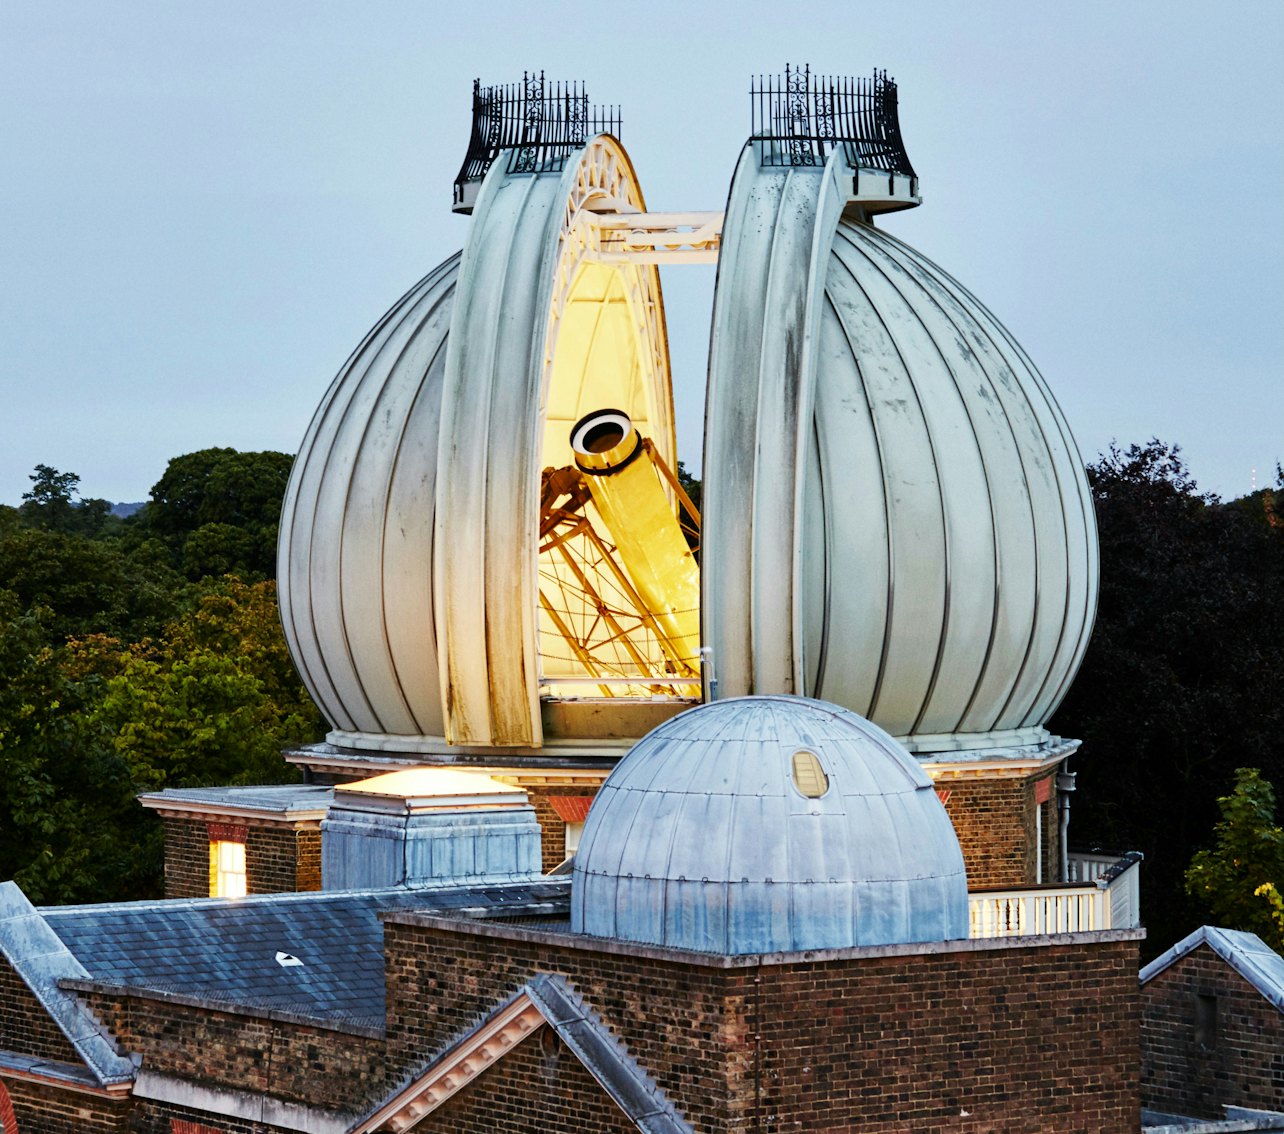 Royal Observatory Greenwich - Accommodations in London